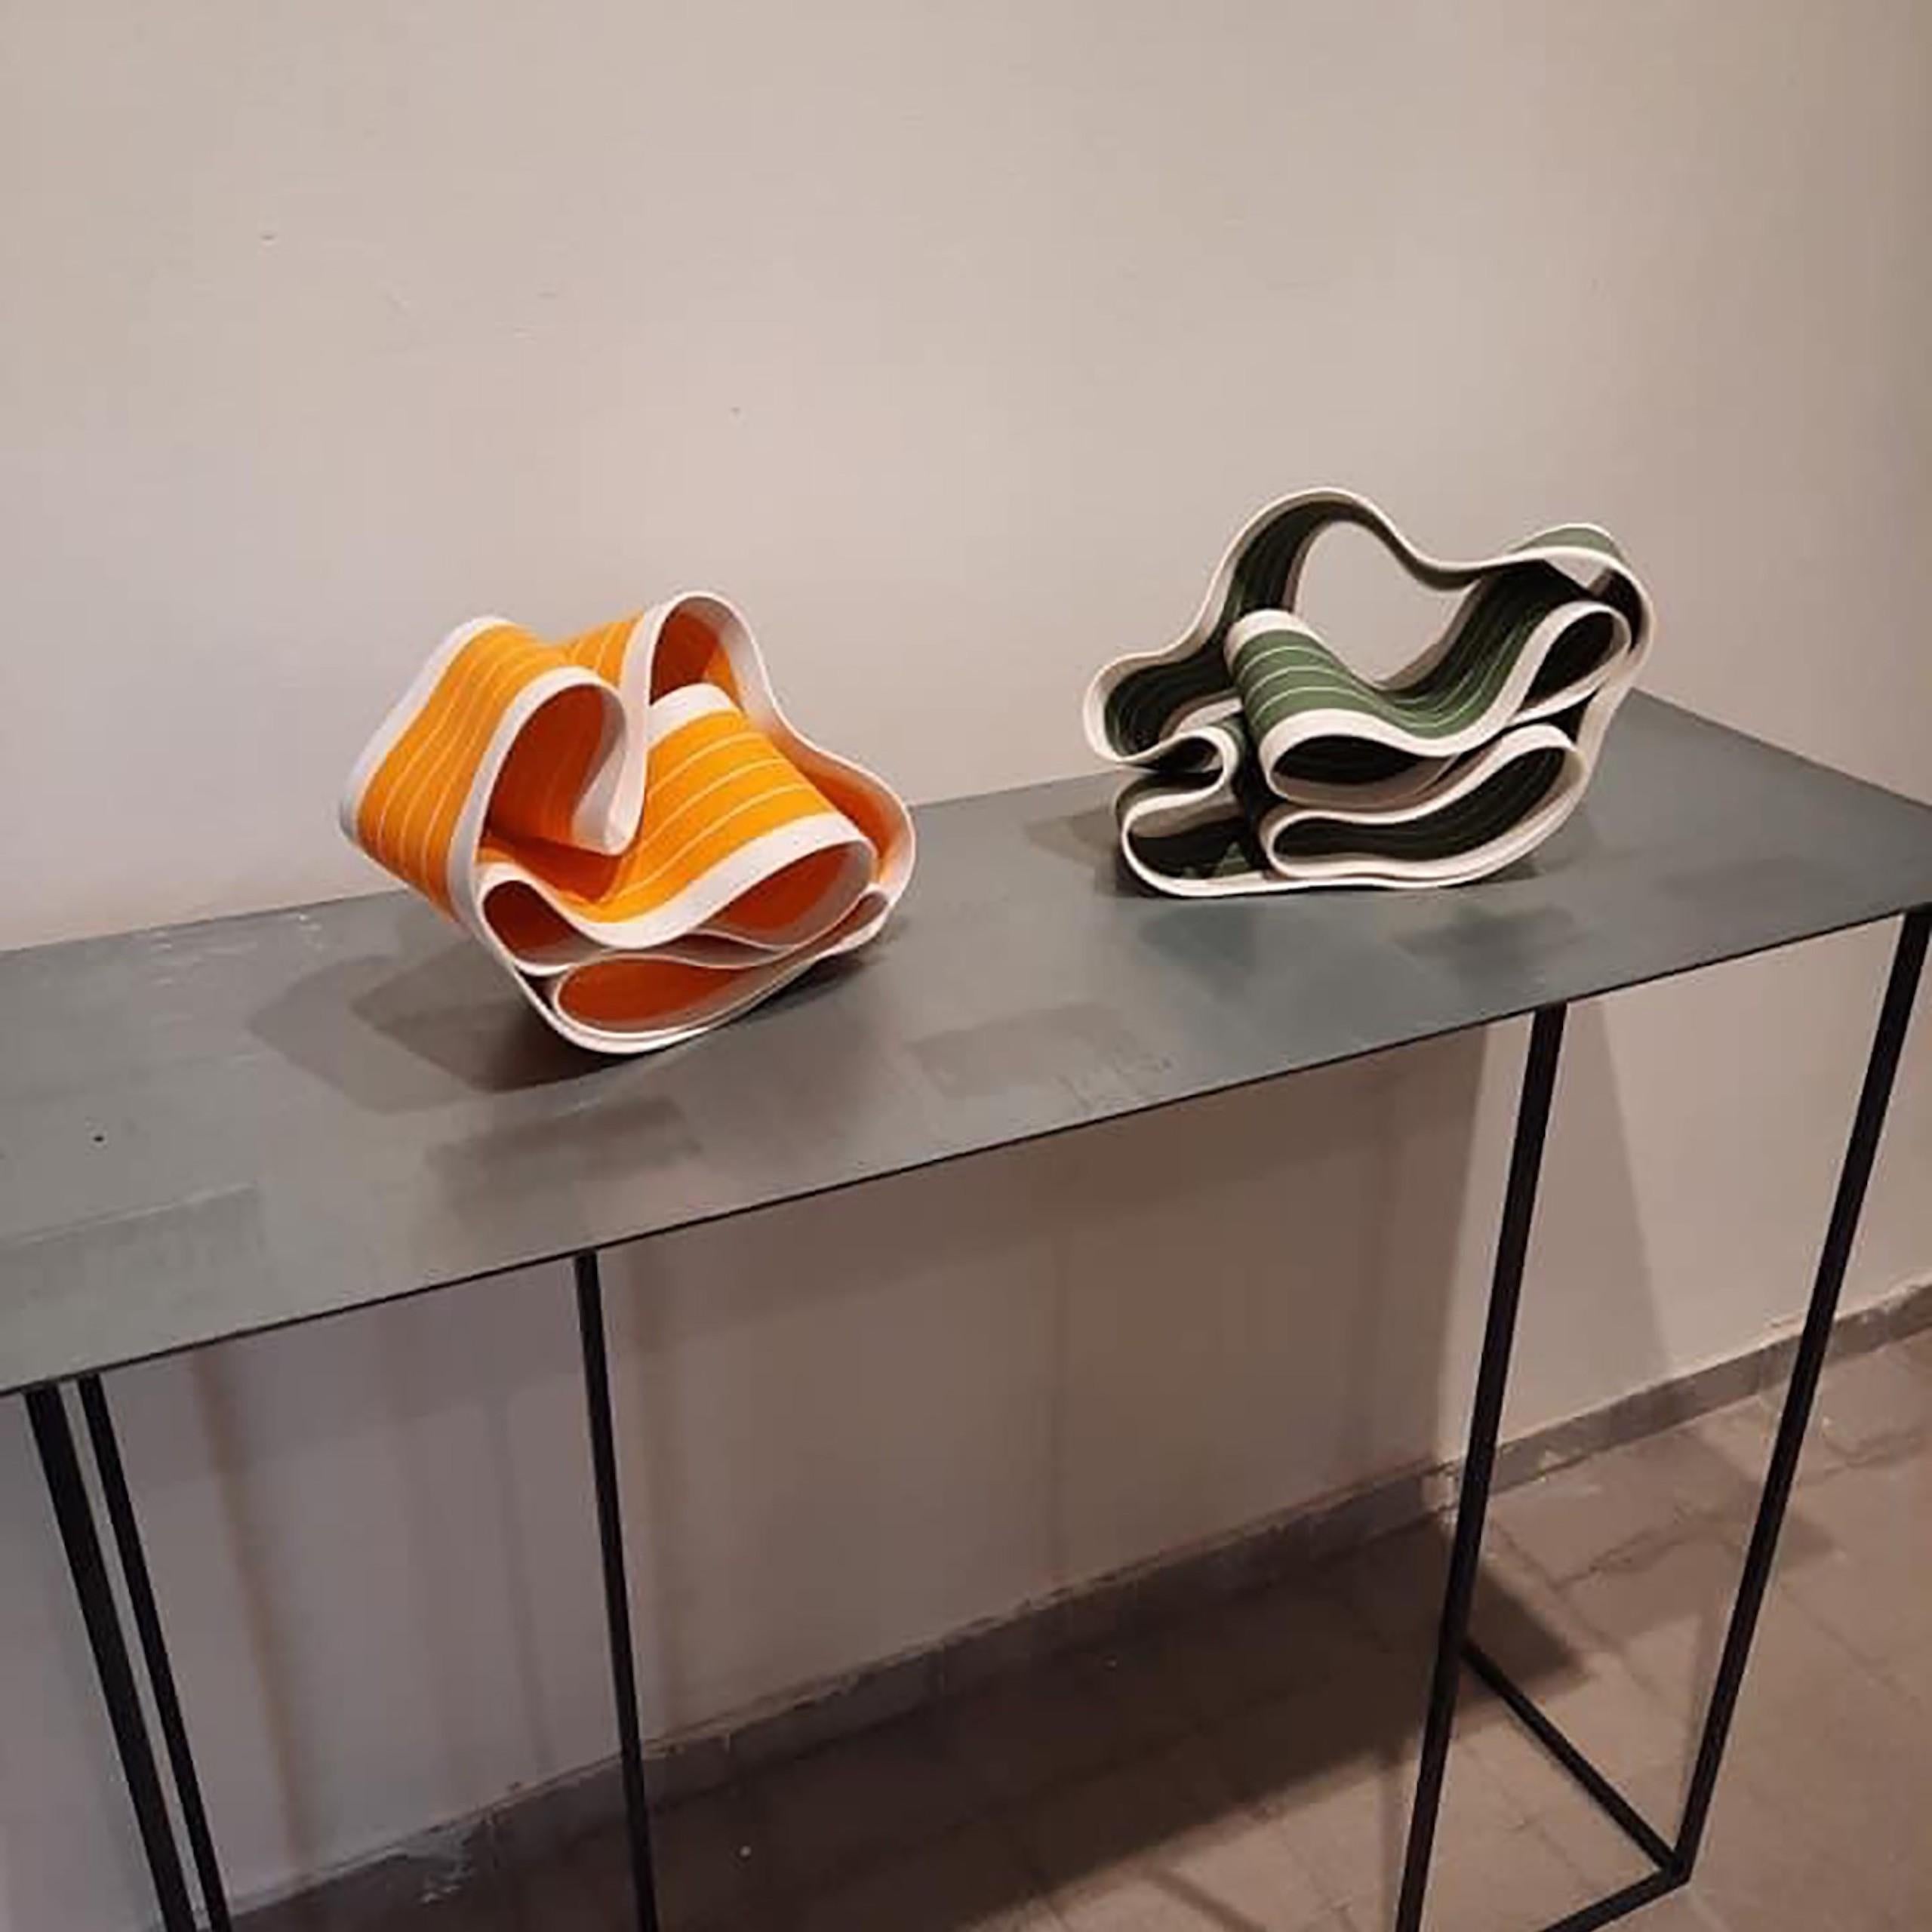 Folding in Motion 4 by Simcha Even-Chen - Porcelain sculpture, green lines For Sale 4